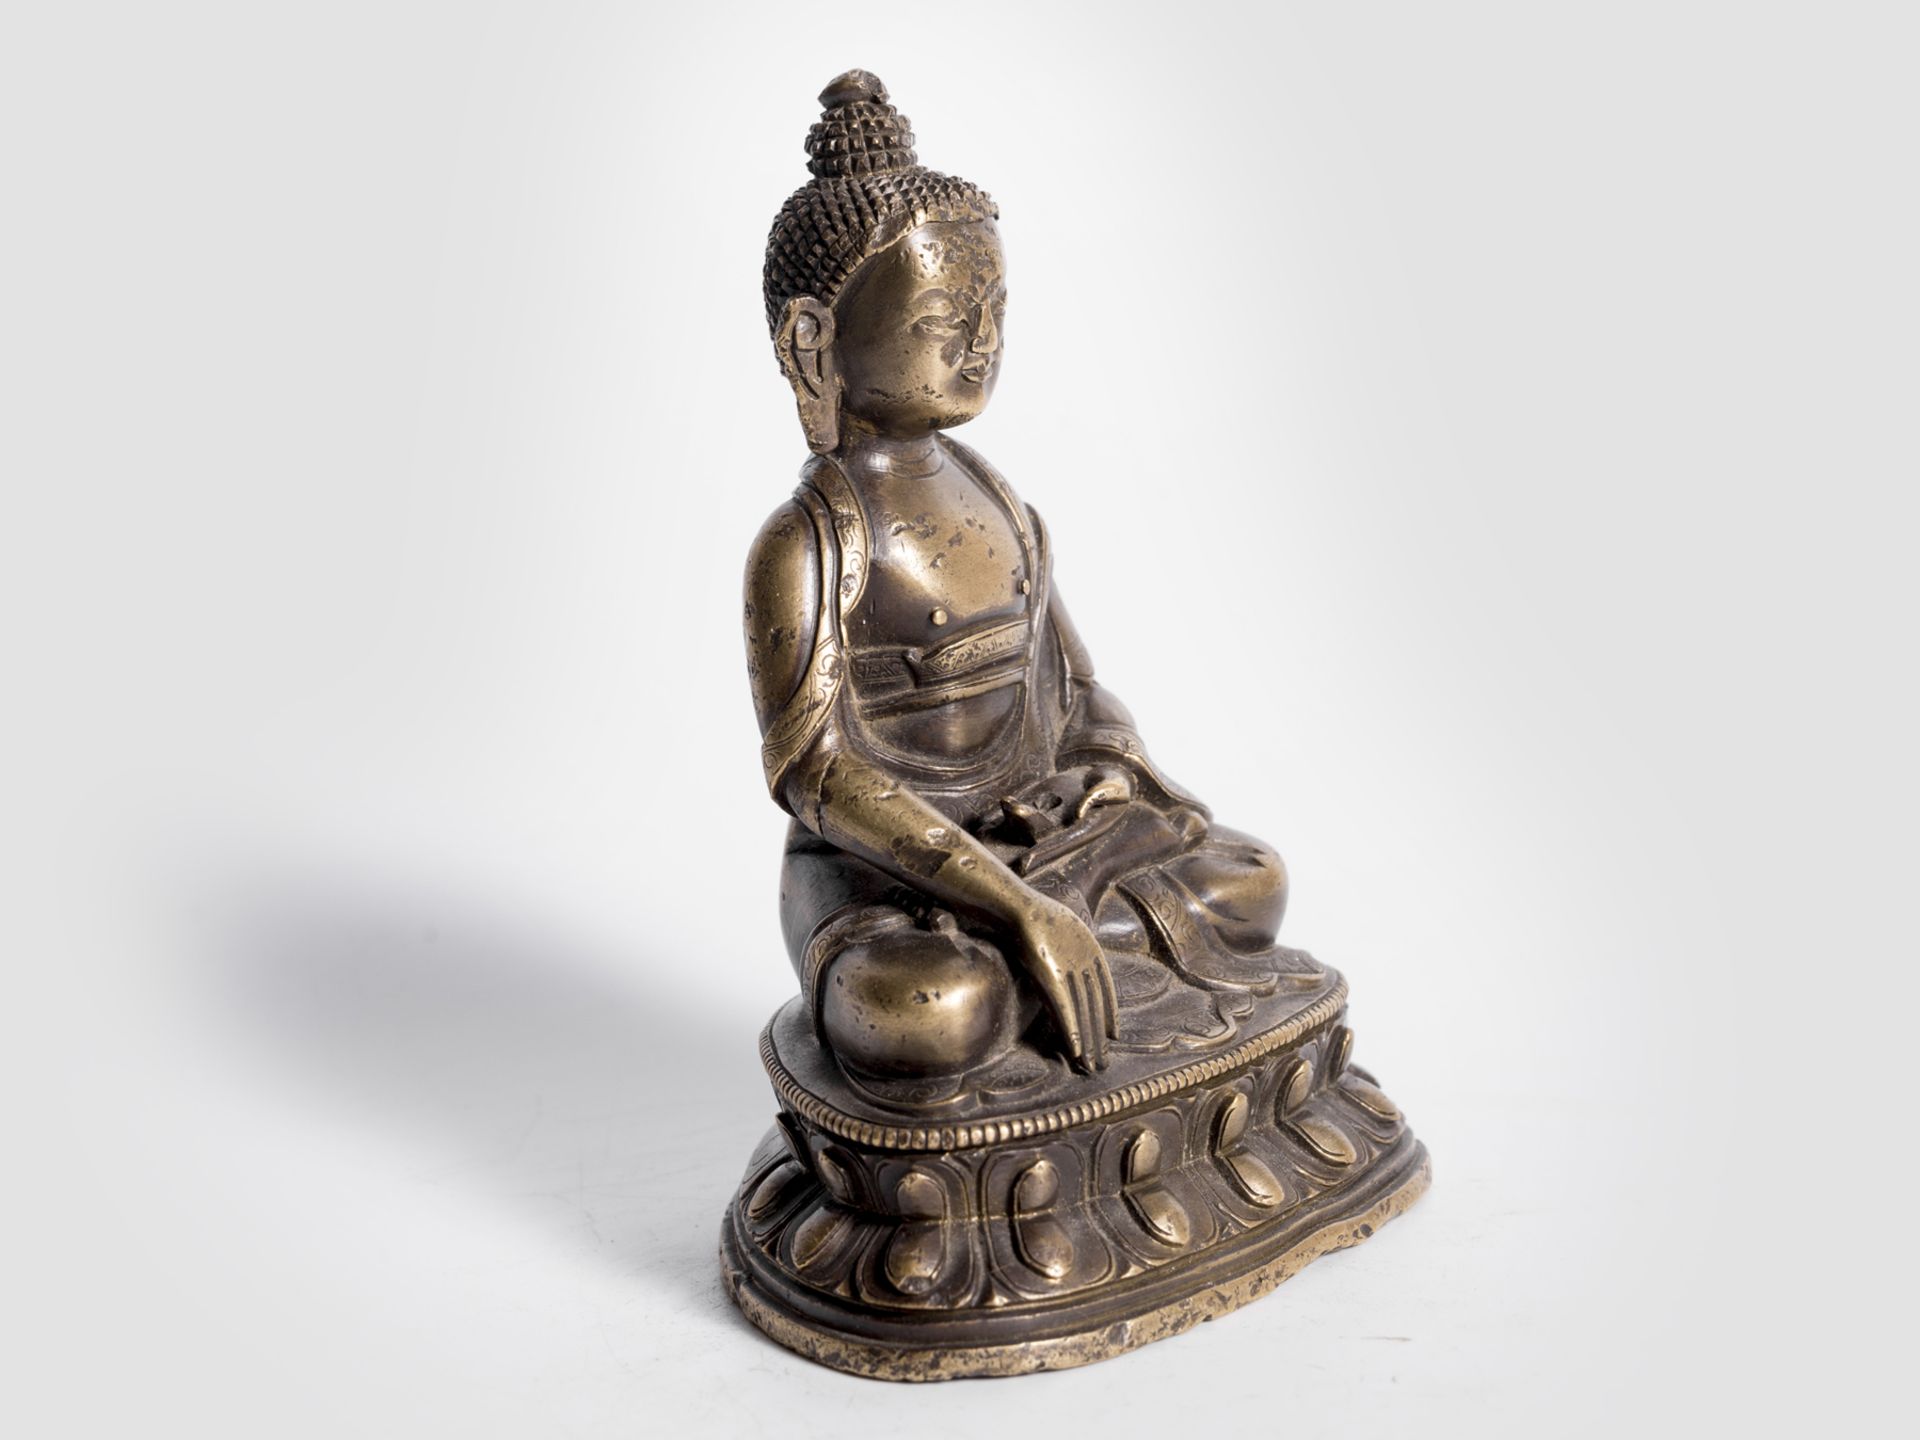 Sitting Buddha, Southeast Asia / Thailand?, 17th - 19th century or earlier - Image 2 of 5